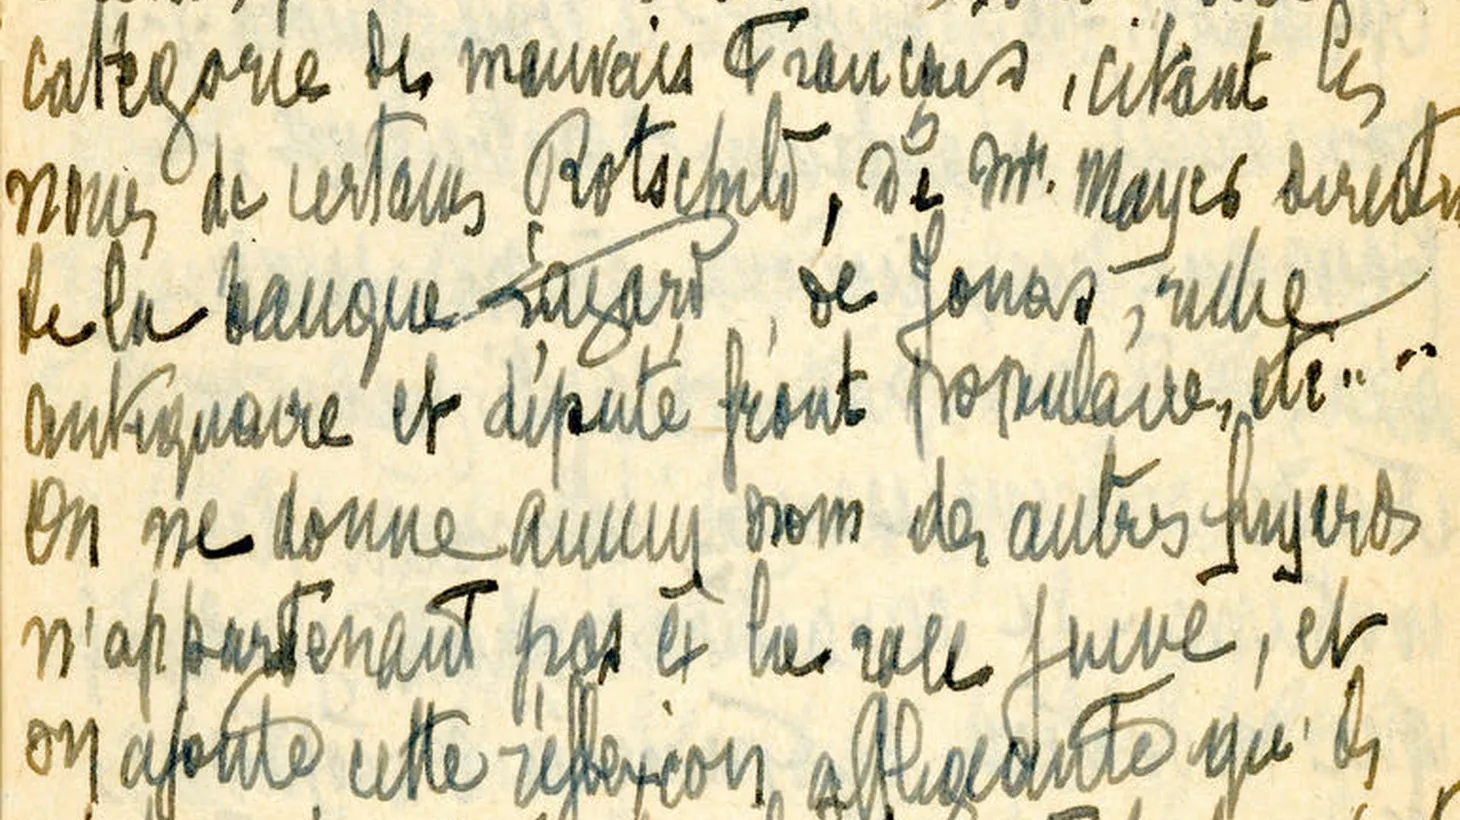 Kitty Morse discovered journals stashed away in a valise kept by her great-grandfather.